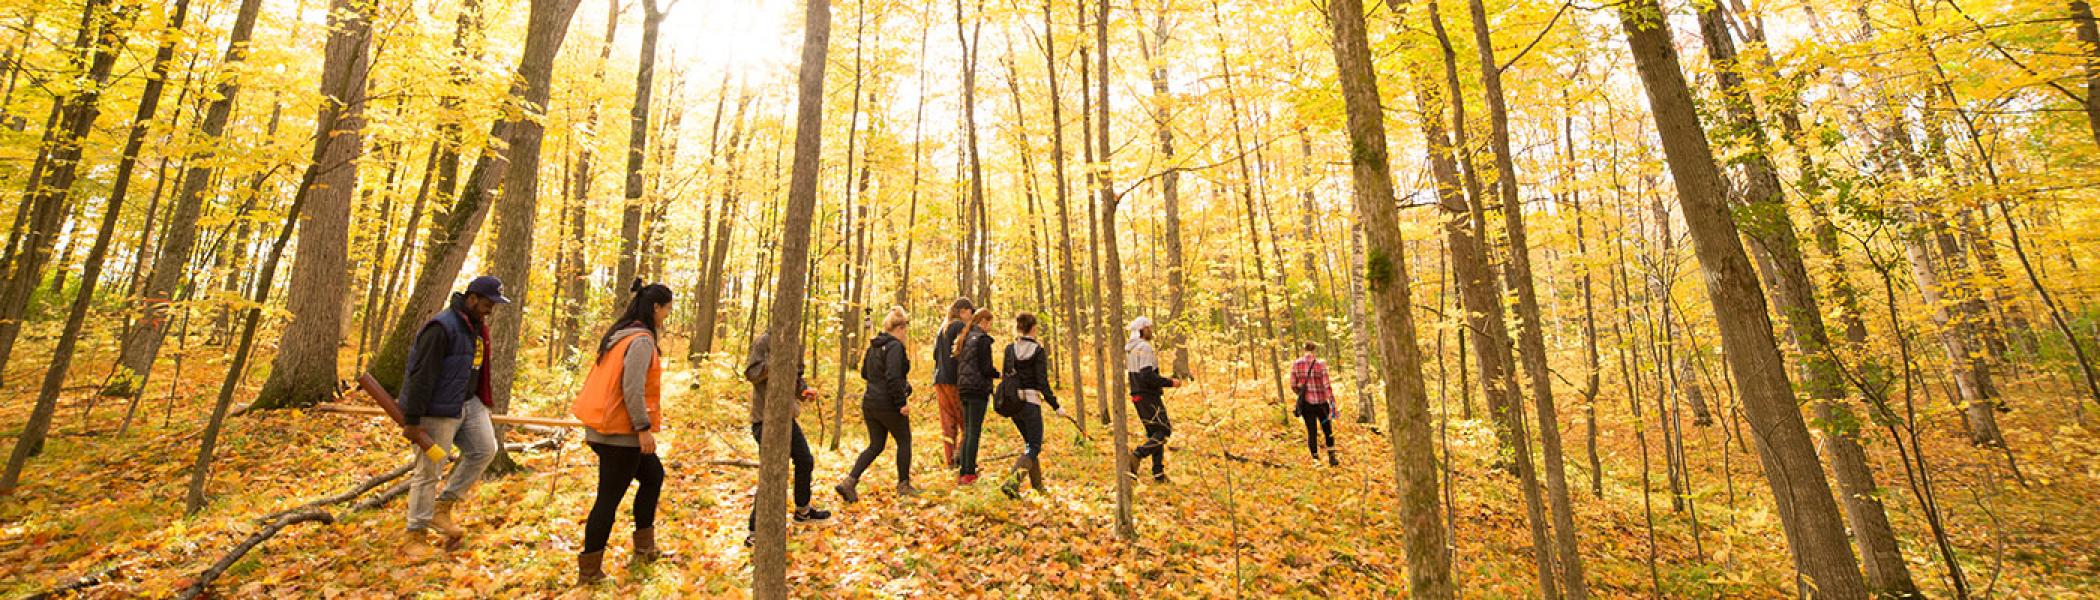 Students walking through the drumlin's woods